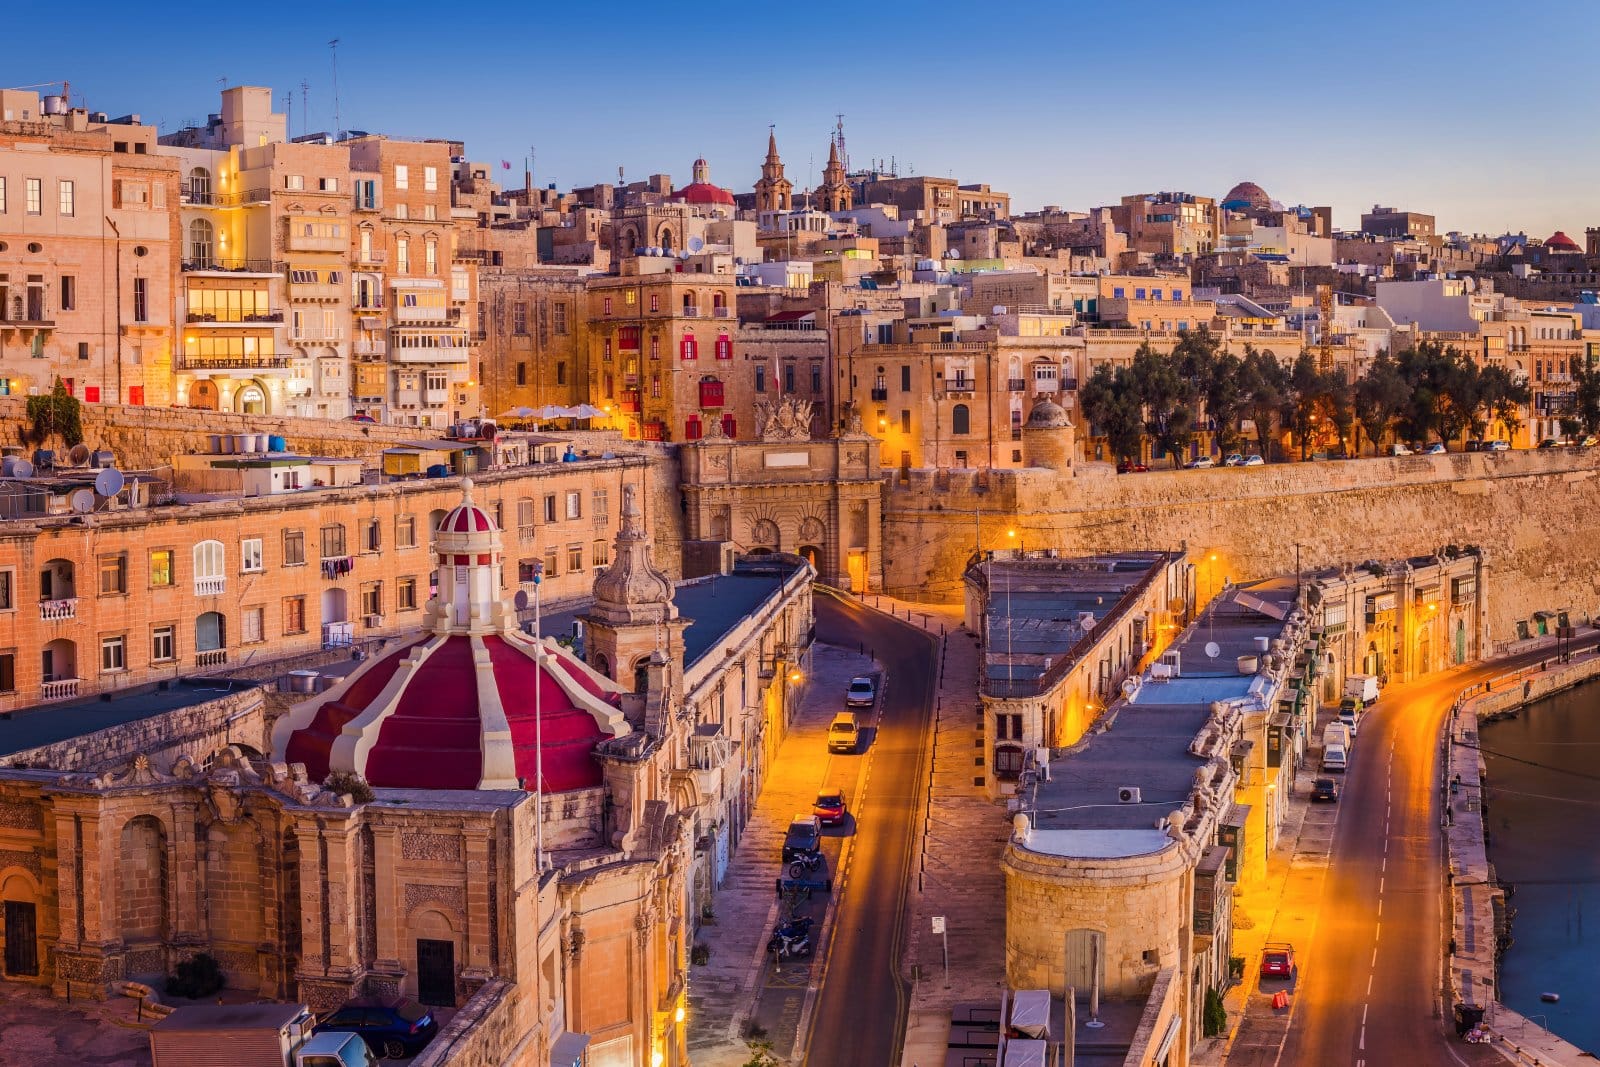 Image Credit: Shutterstock / ZGPhotography <p>Small but densely packed with tourists, Malta sees its share of British visitors. Loud, drunken behaviour and lack of respect for historical sites have led to a growing resentment among locals.</p>